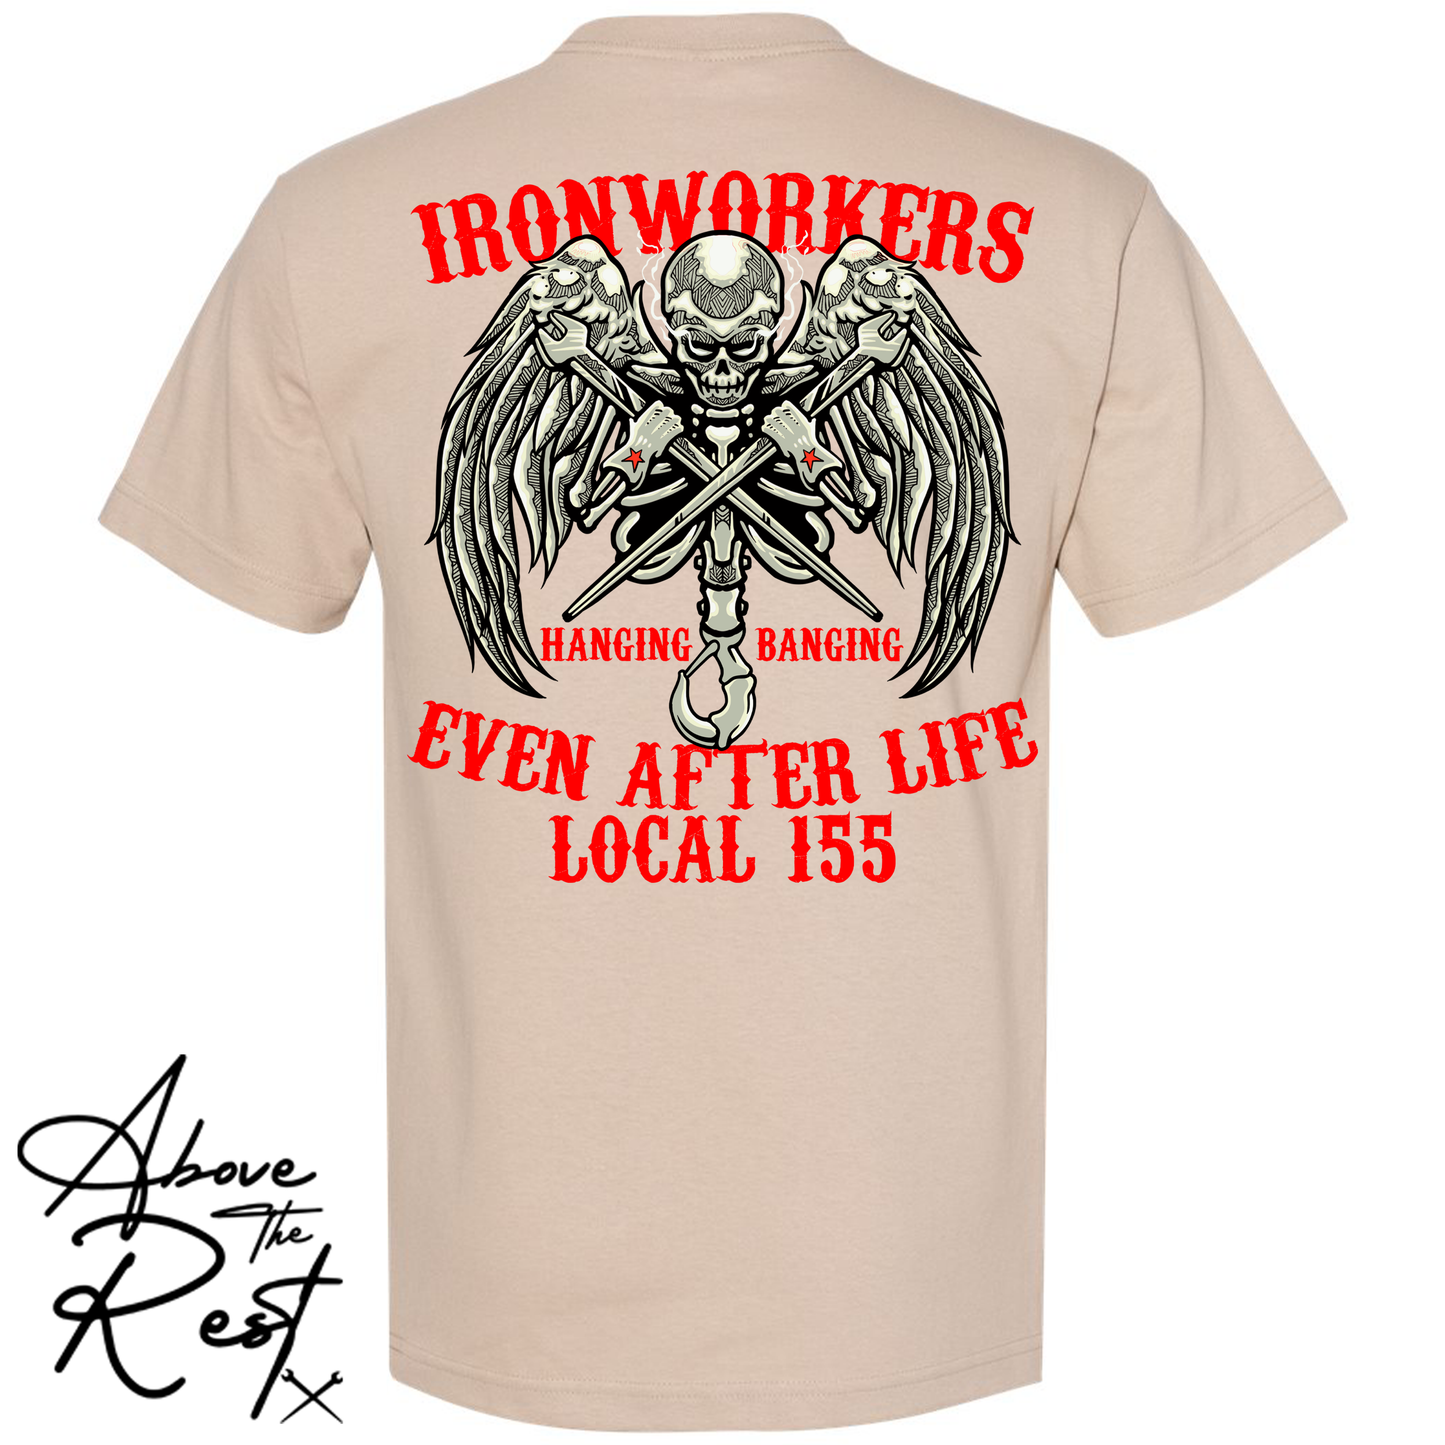 AFTER LIFE T-SHIRT LOCAL 155